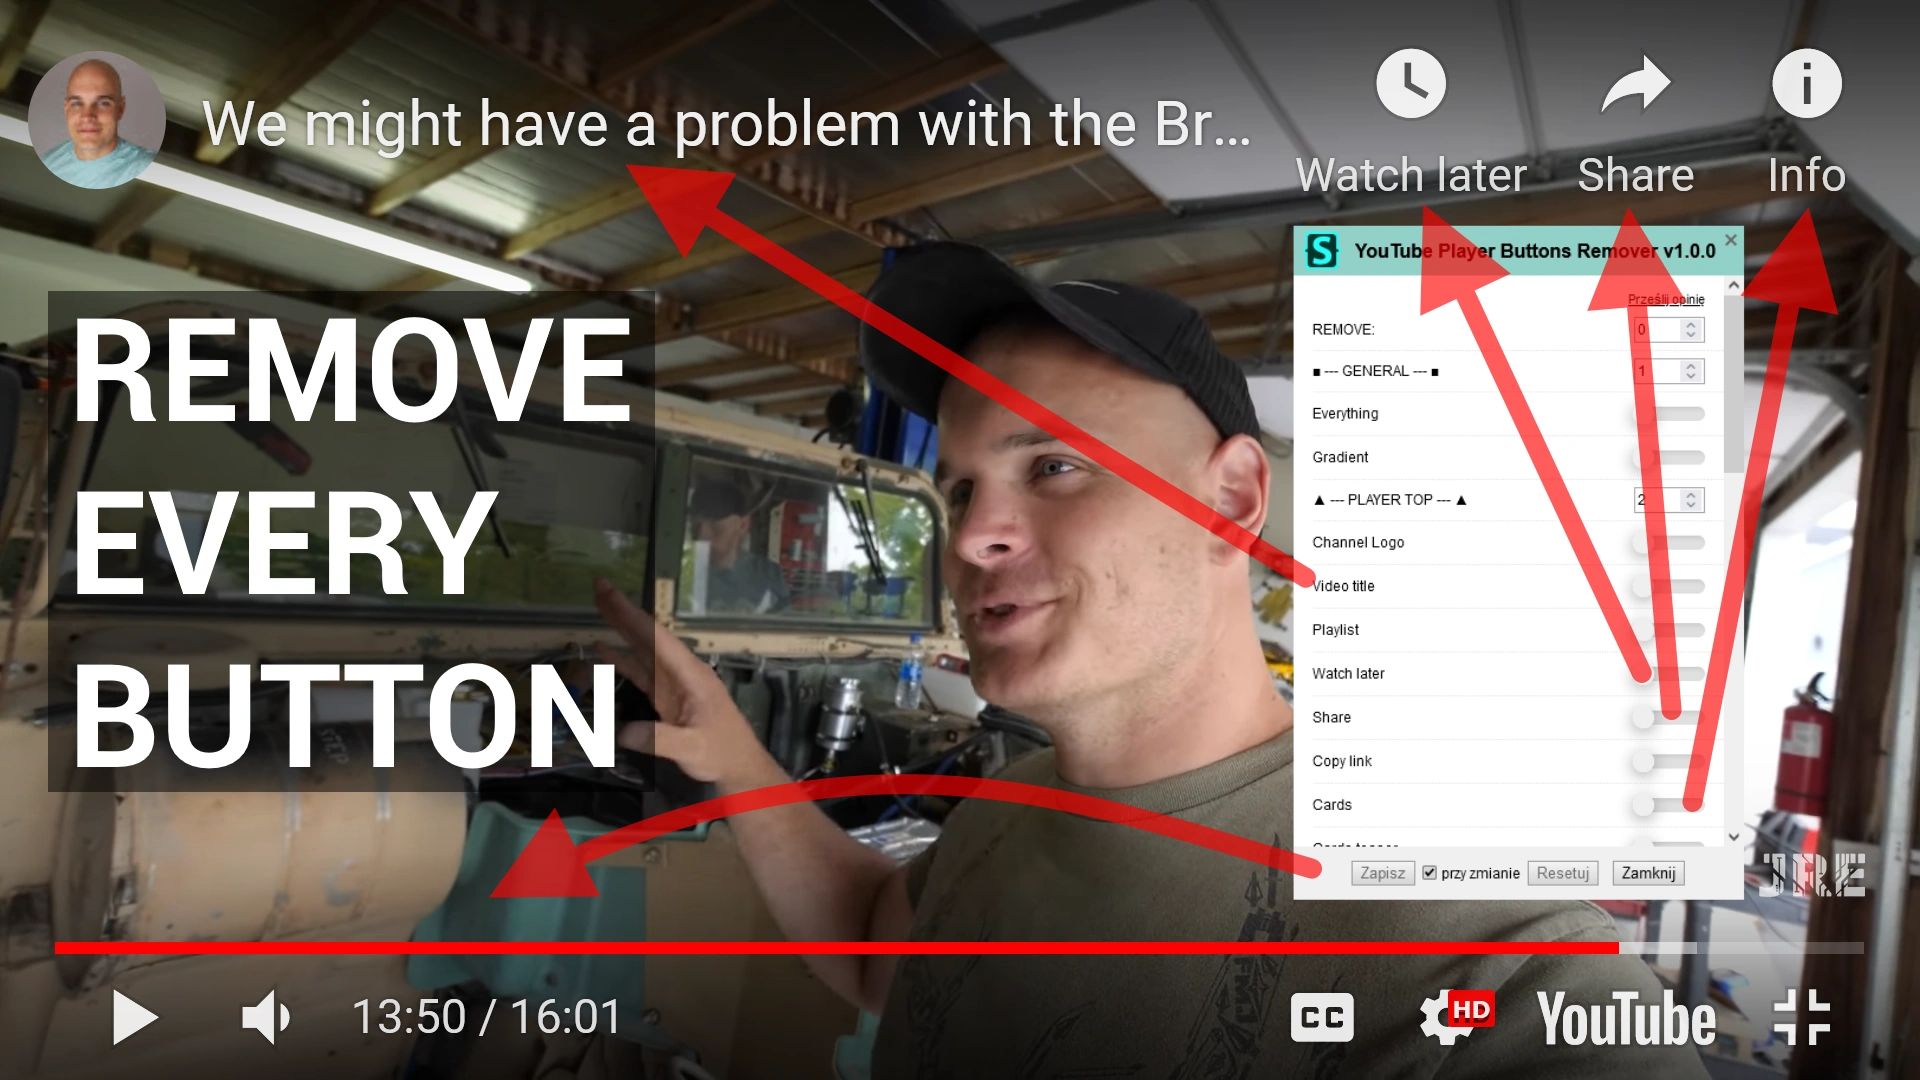 YouTube Player Buttons Remover screenshot